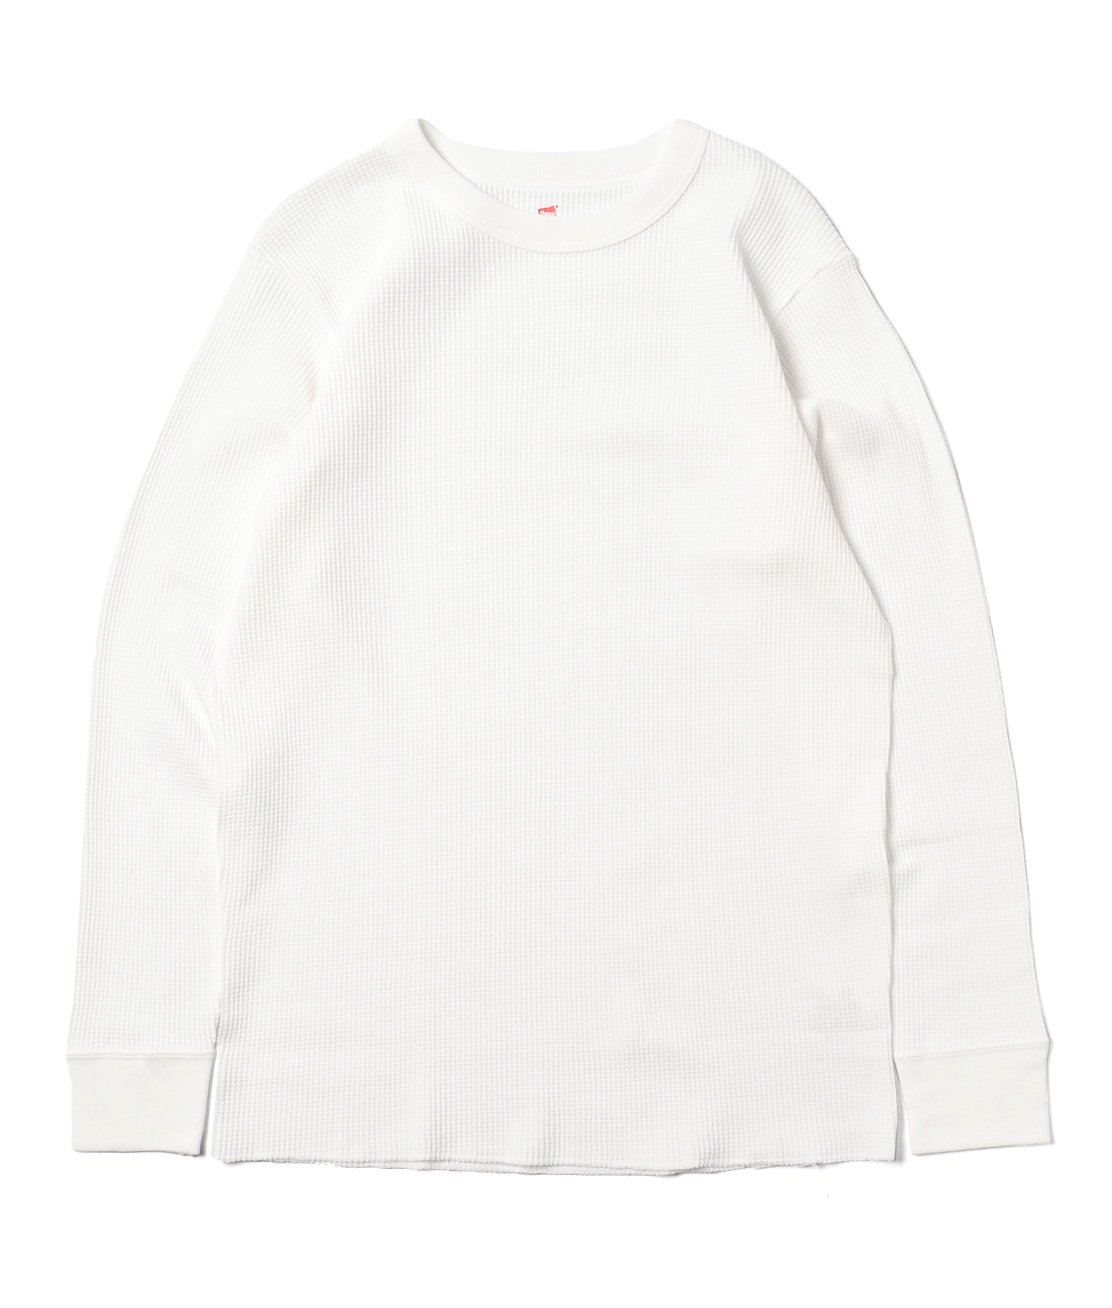 Hanes】HM4-Y203 THERMAL TOP - OFF WHITE サーマルシャツ 100% USA